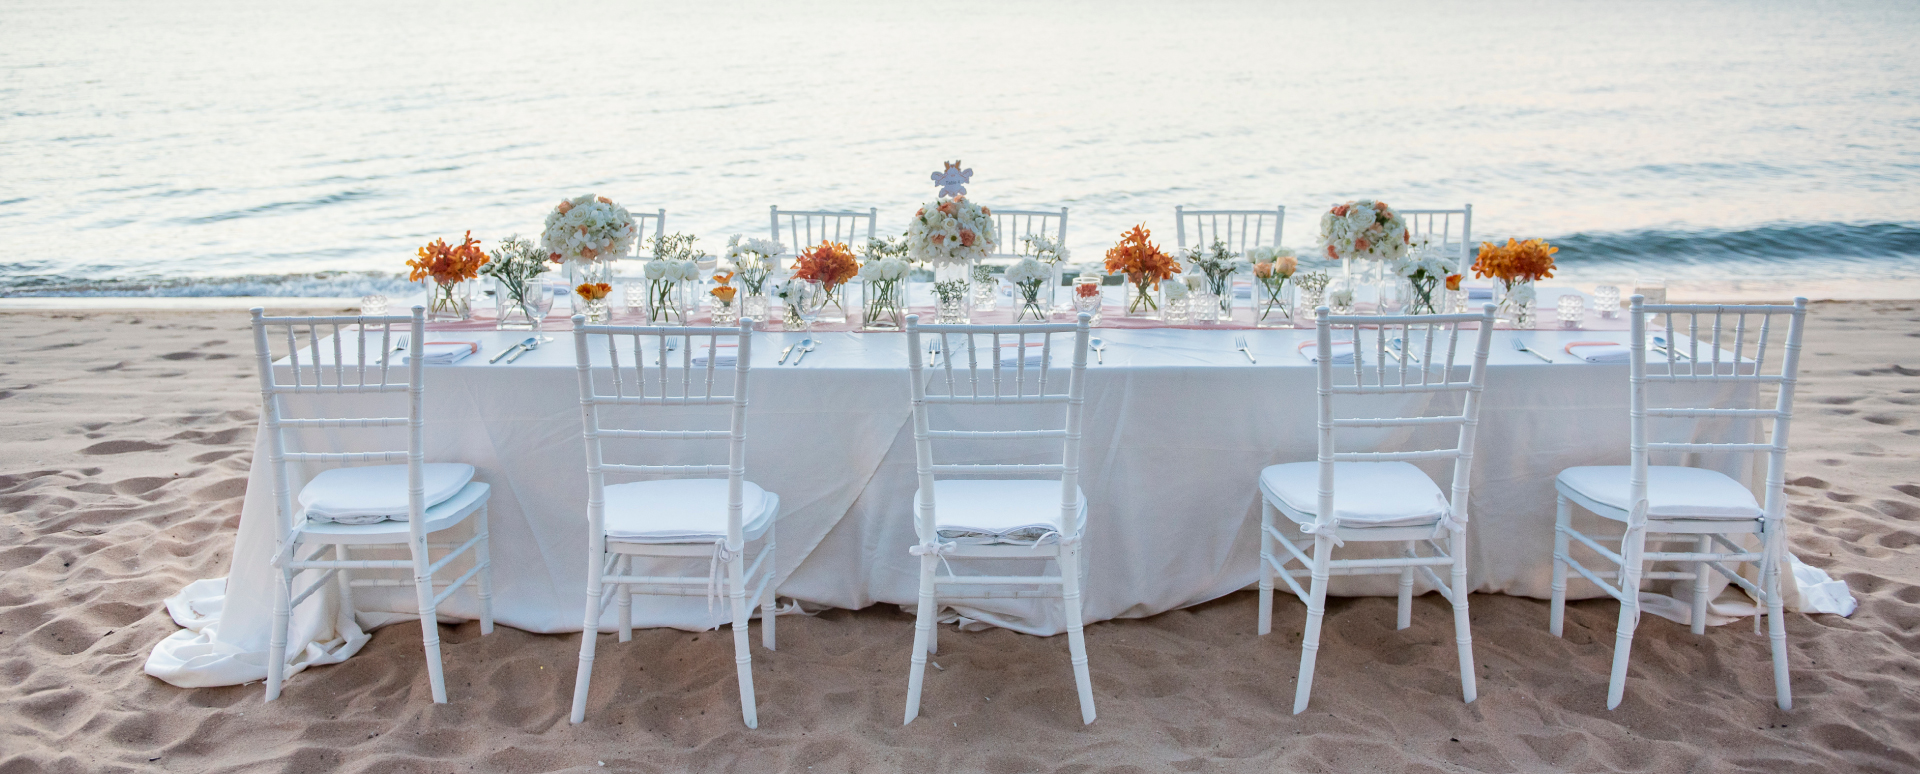 Table for a wedding with white tablecloth, 10 white chairs, and flowers in vases on a beach near the ocean.